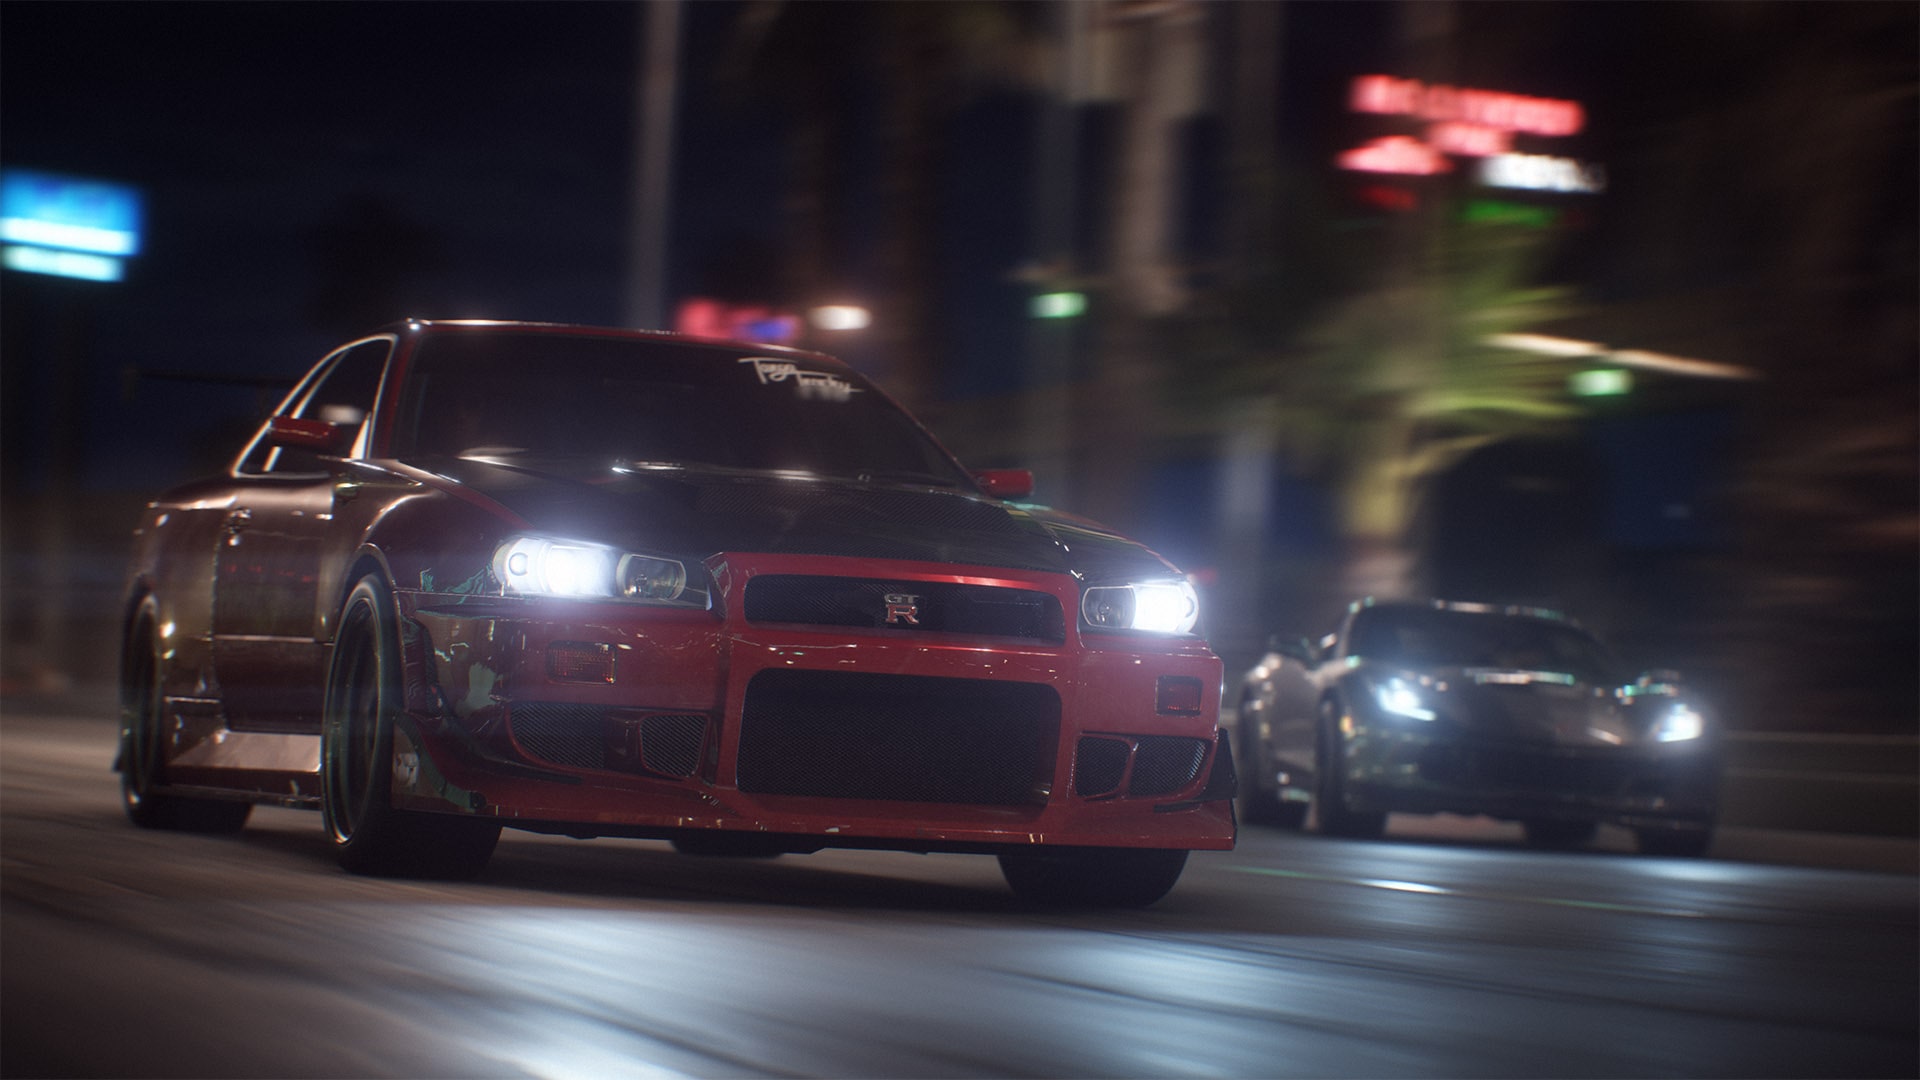 Need for Speed Payback adds new cars and events in Speedcross